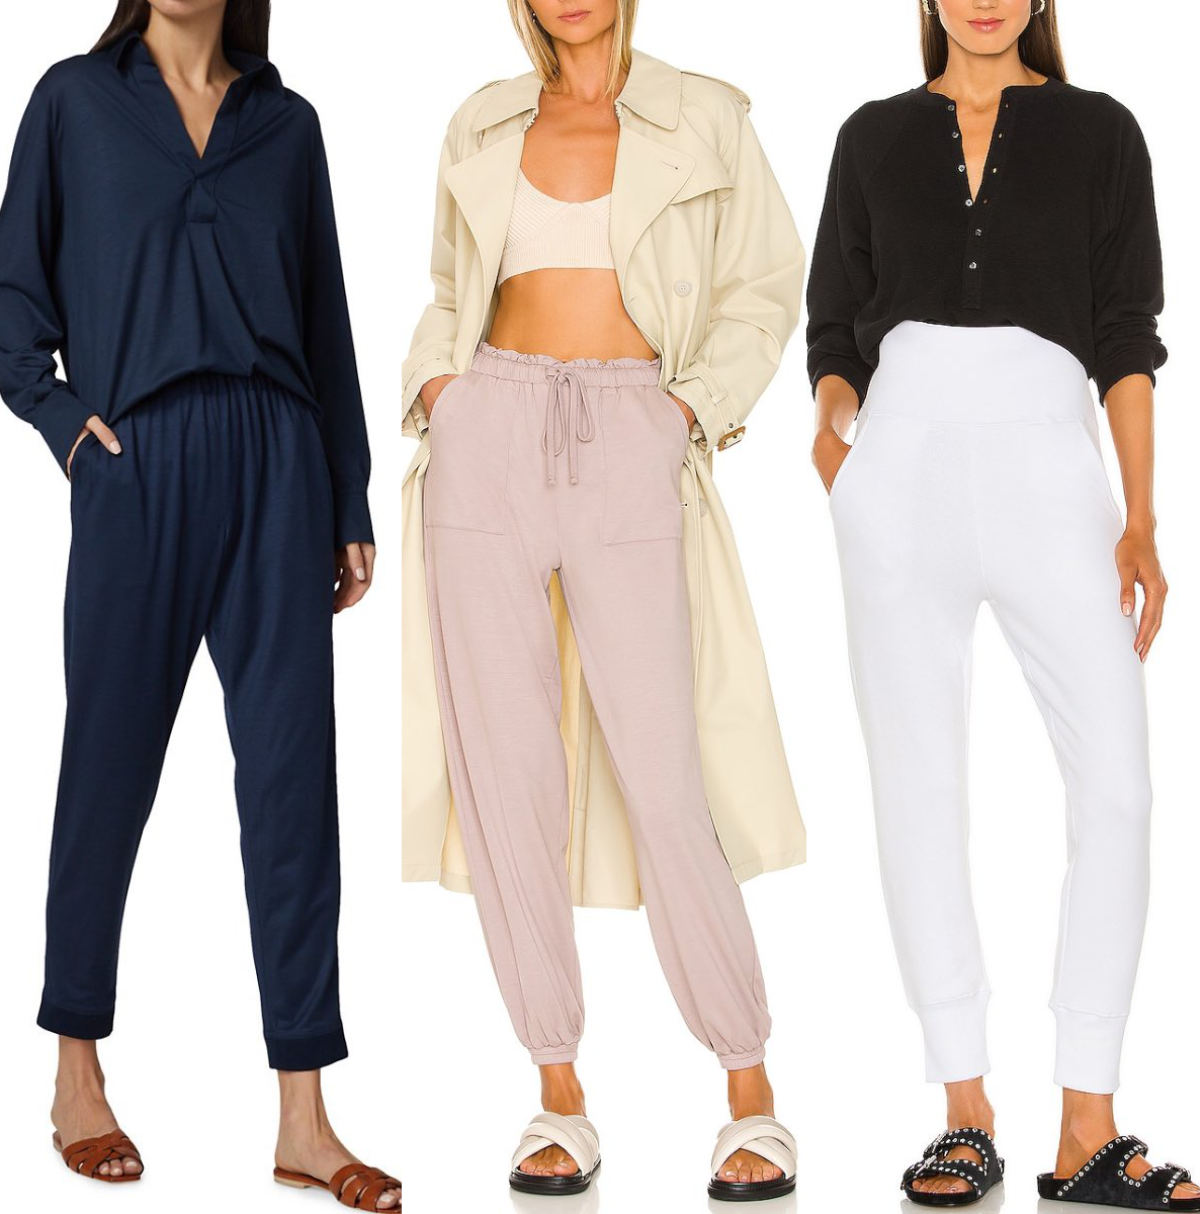 Can You Wear Sweatpants With Sandals? – solowomen